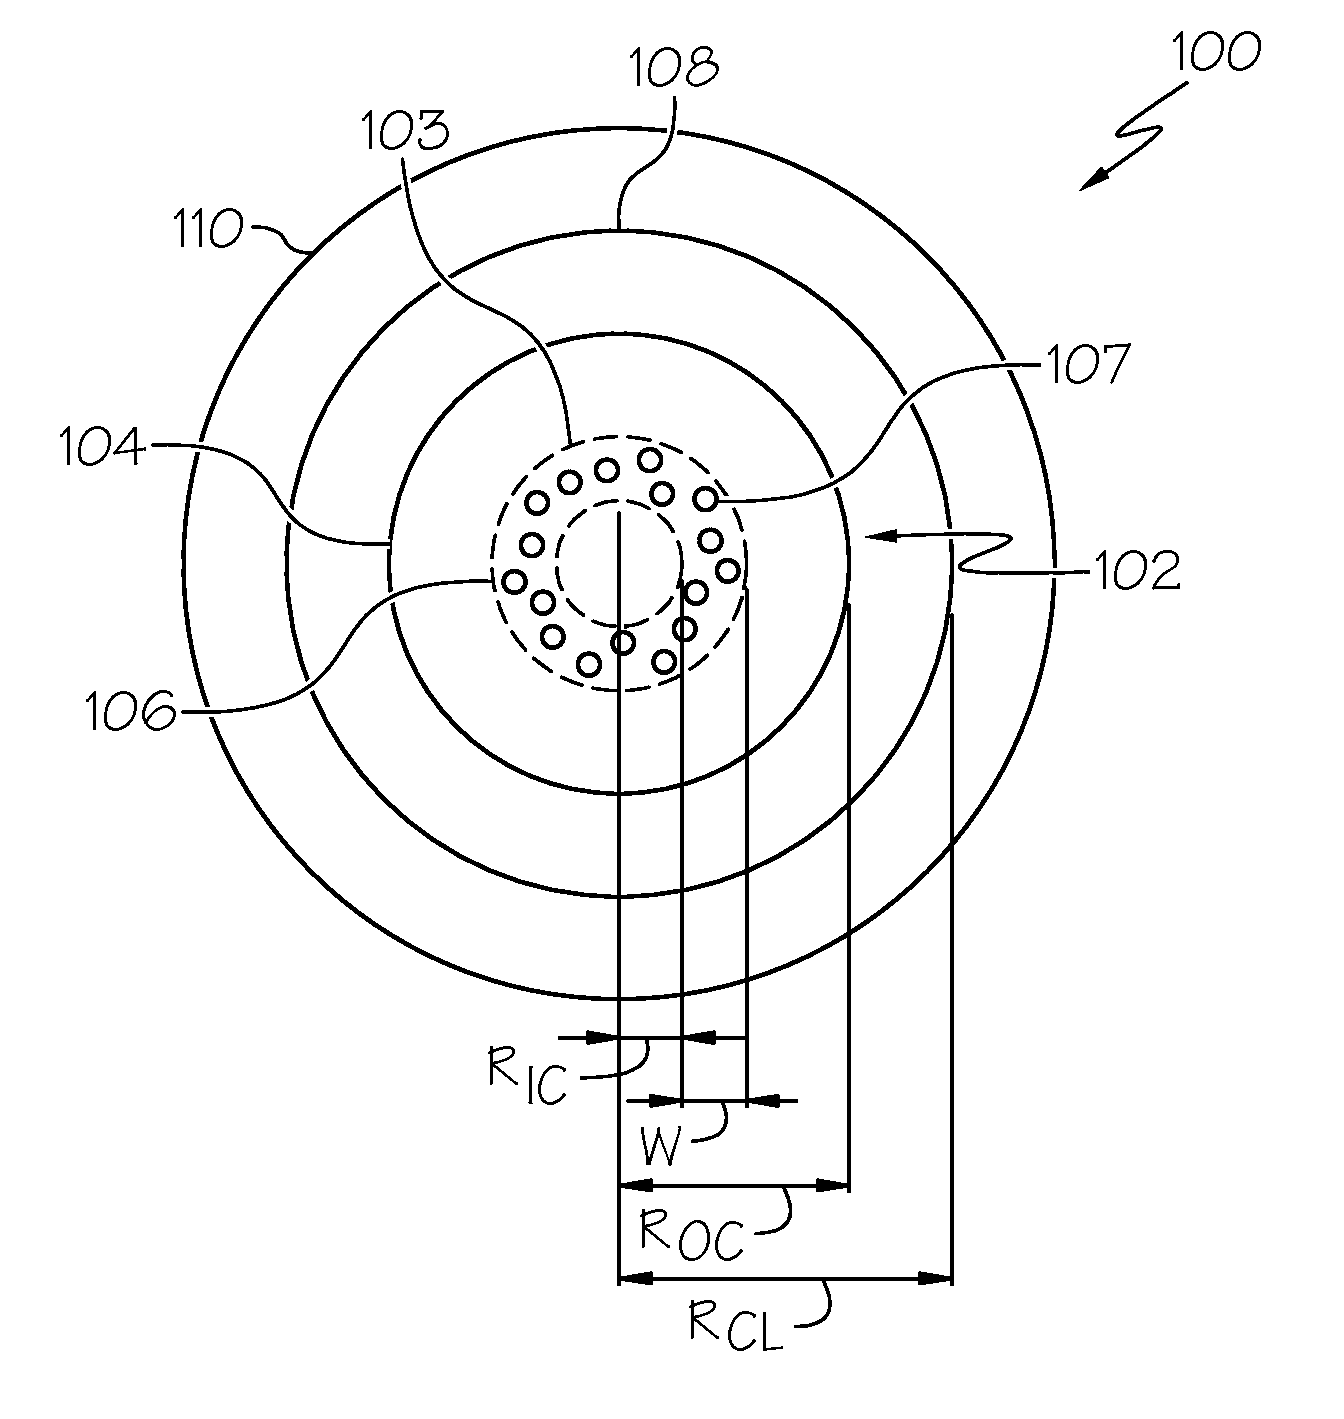 Light Diffusing Fibers and Methods for Making the Same